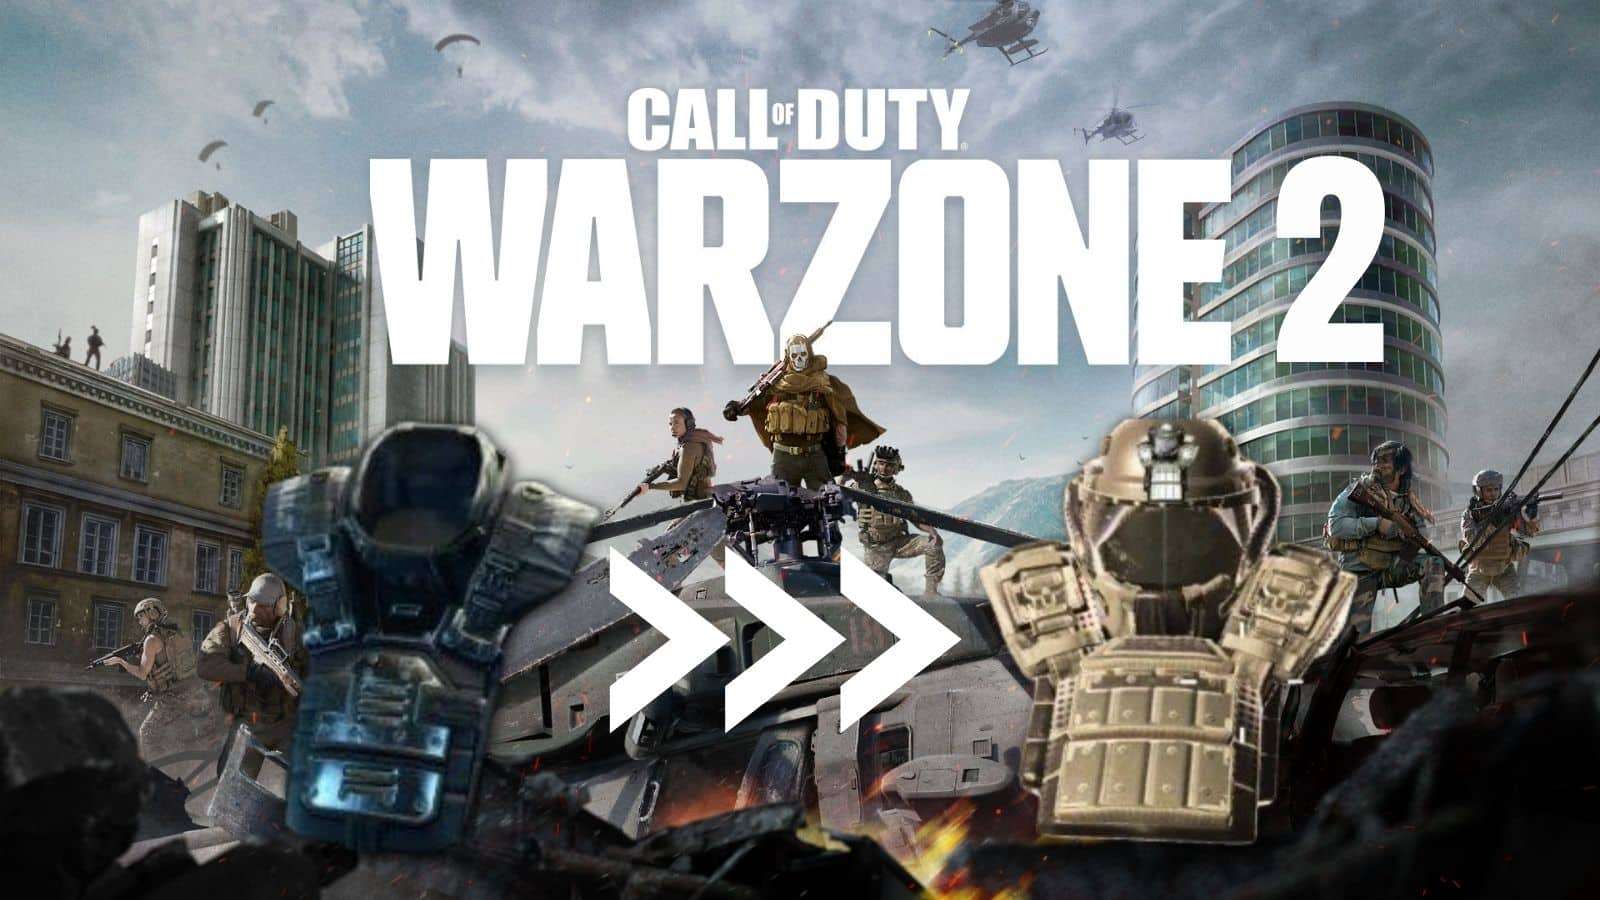 call of duty warzone 2 armor vests thumbnail